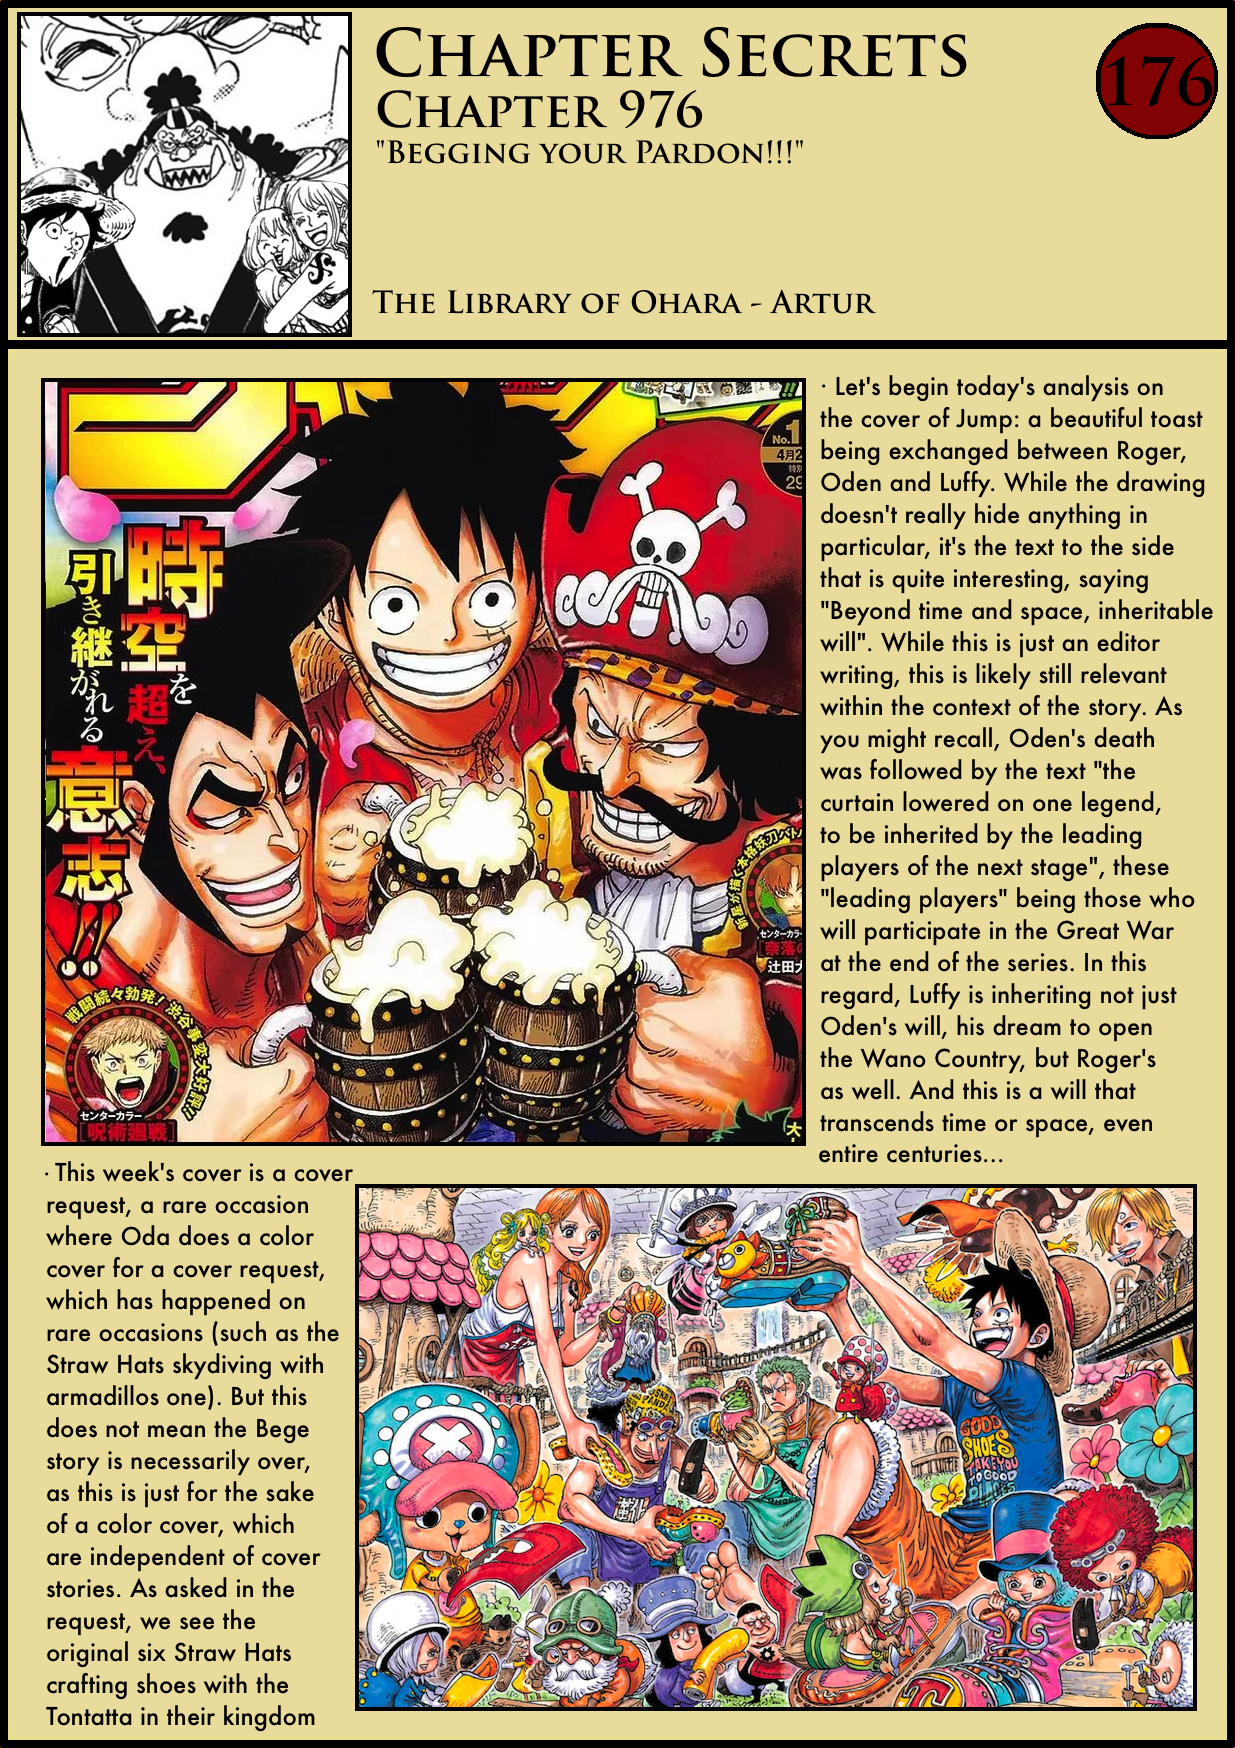 Chapter Secrets Chapter 976 In Depth Analysis The Library Of Ohara